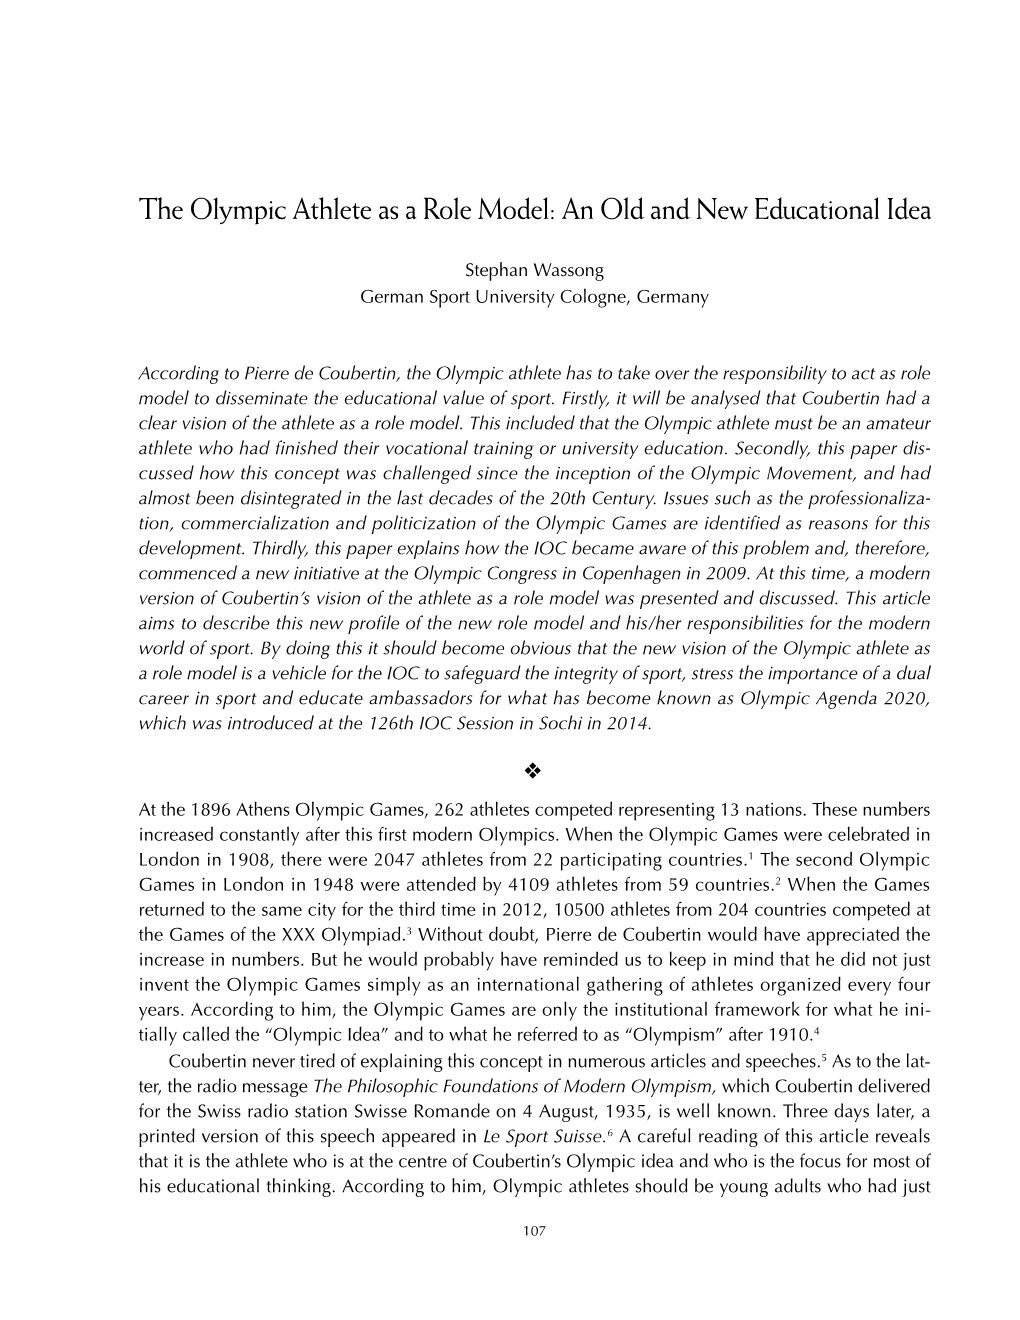 The Olympic Athlete As a Role Model: an Old and New Educational Idea